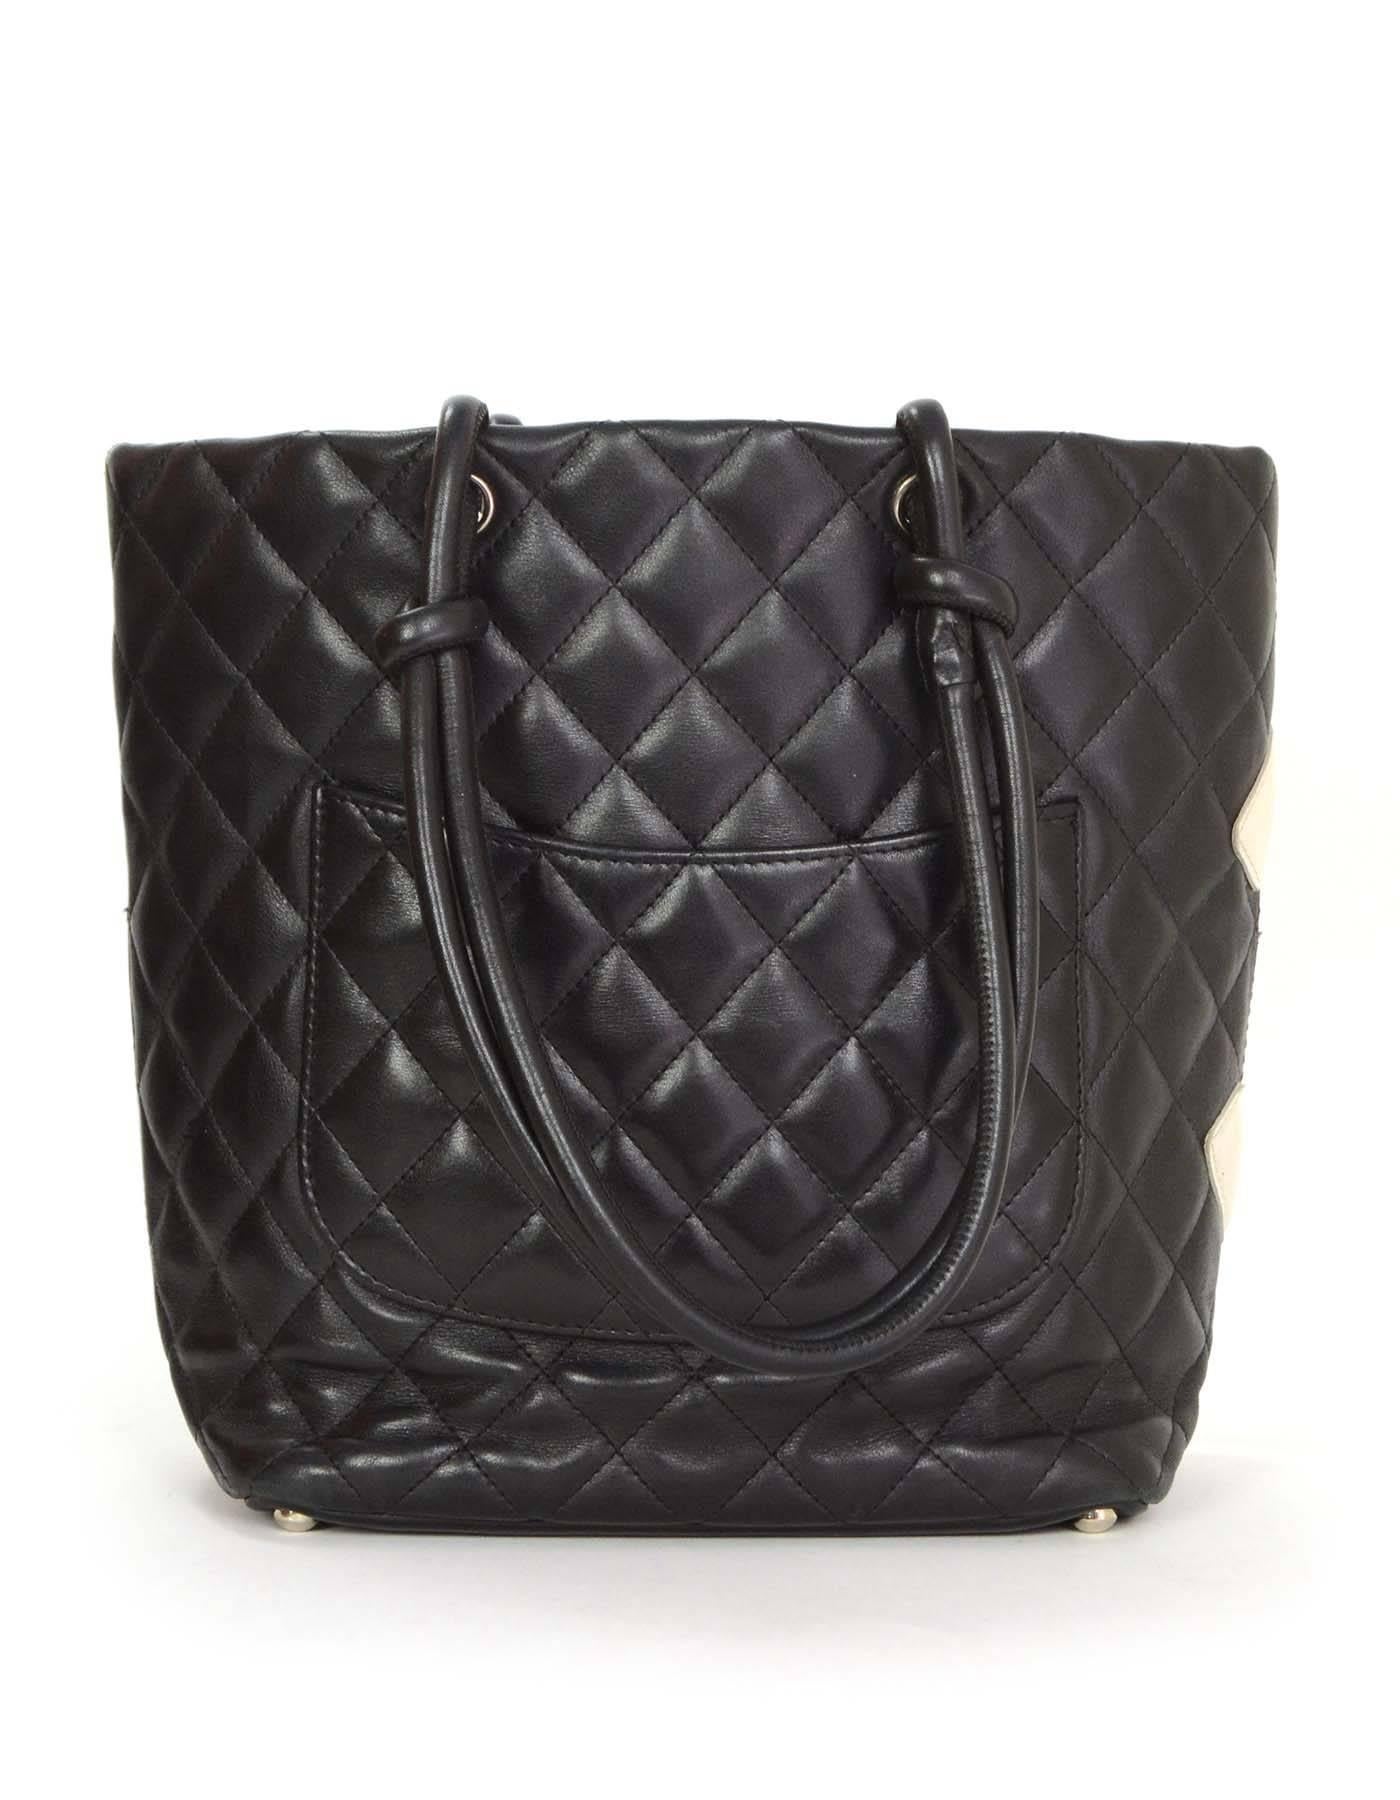 Chanel Black & White Leather Cambon Tote Bag SHW In Good Condition In New York, NY